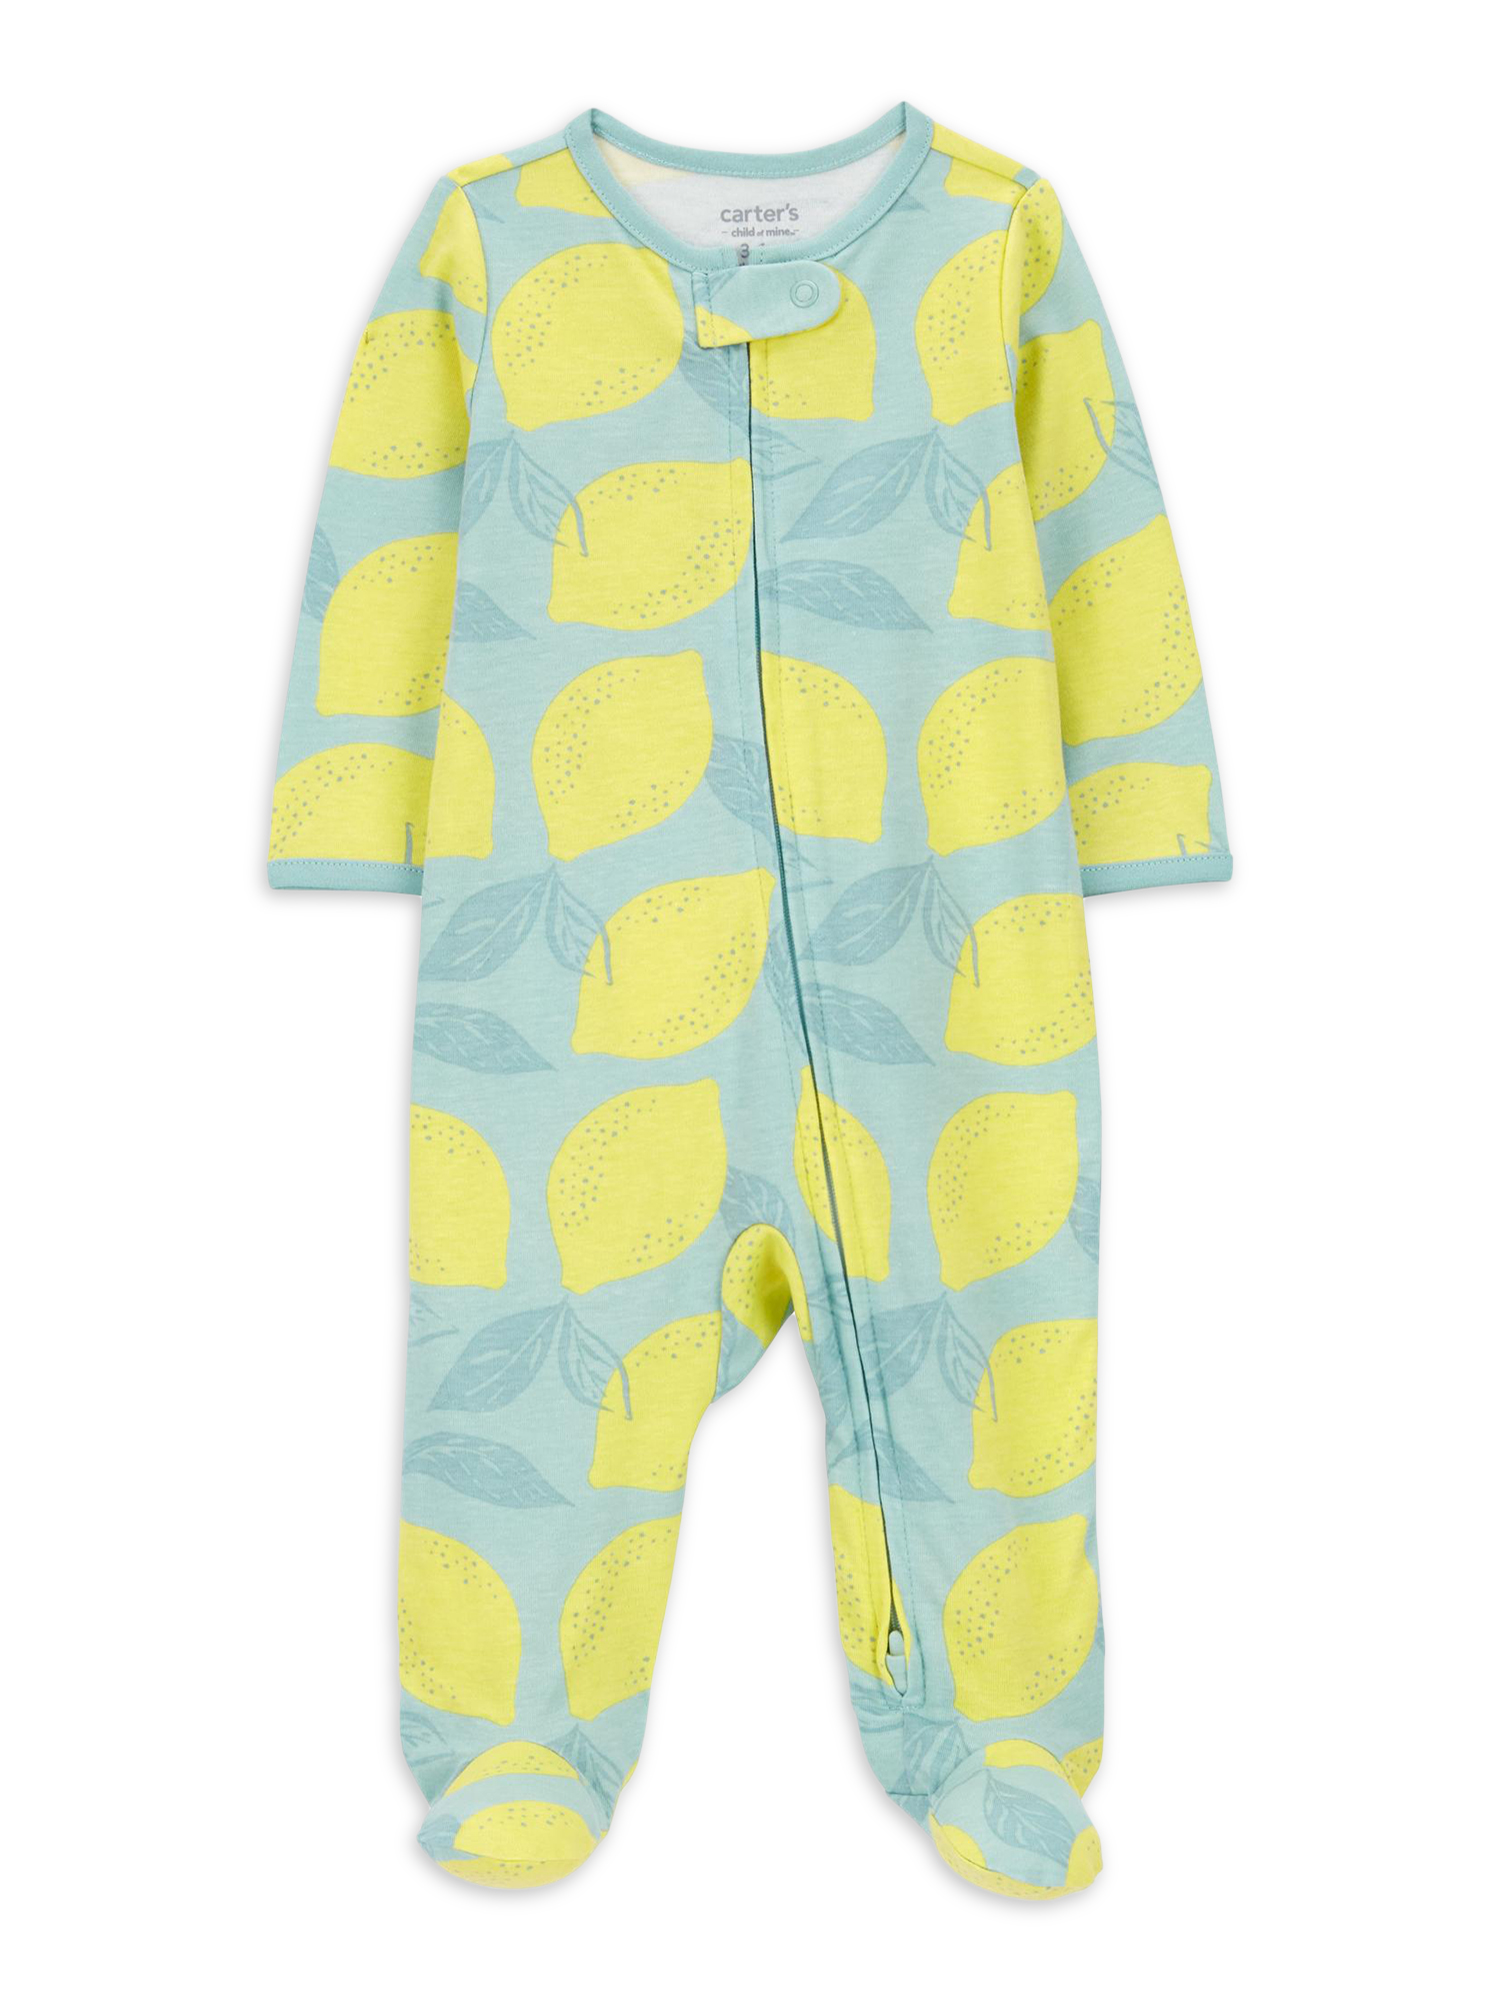 Carter's Child of Mine Baby Girl Sleep N Play, One-Piece, Sizes Preemie-6/9 Months - image 1 of 6